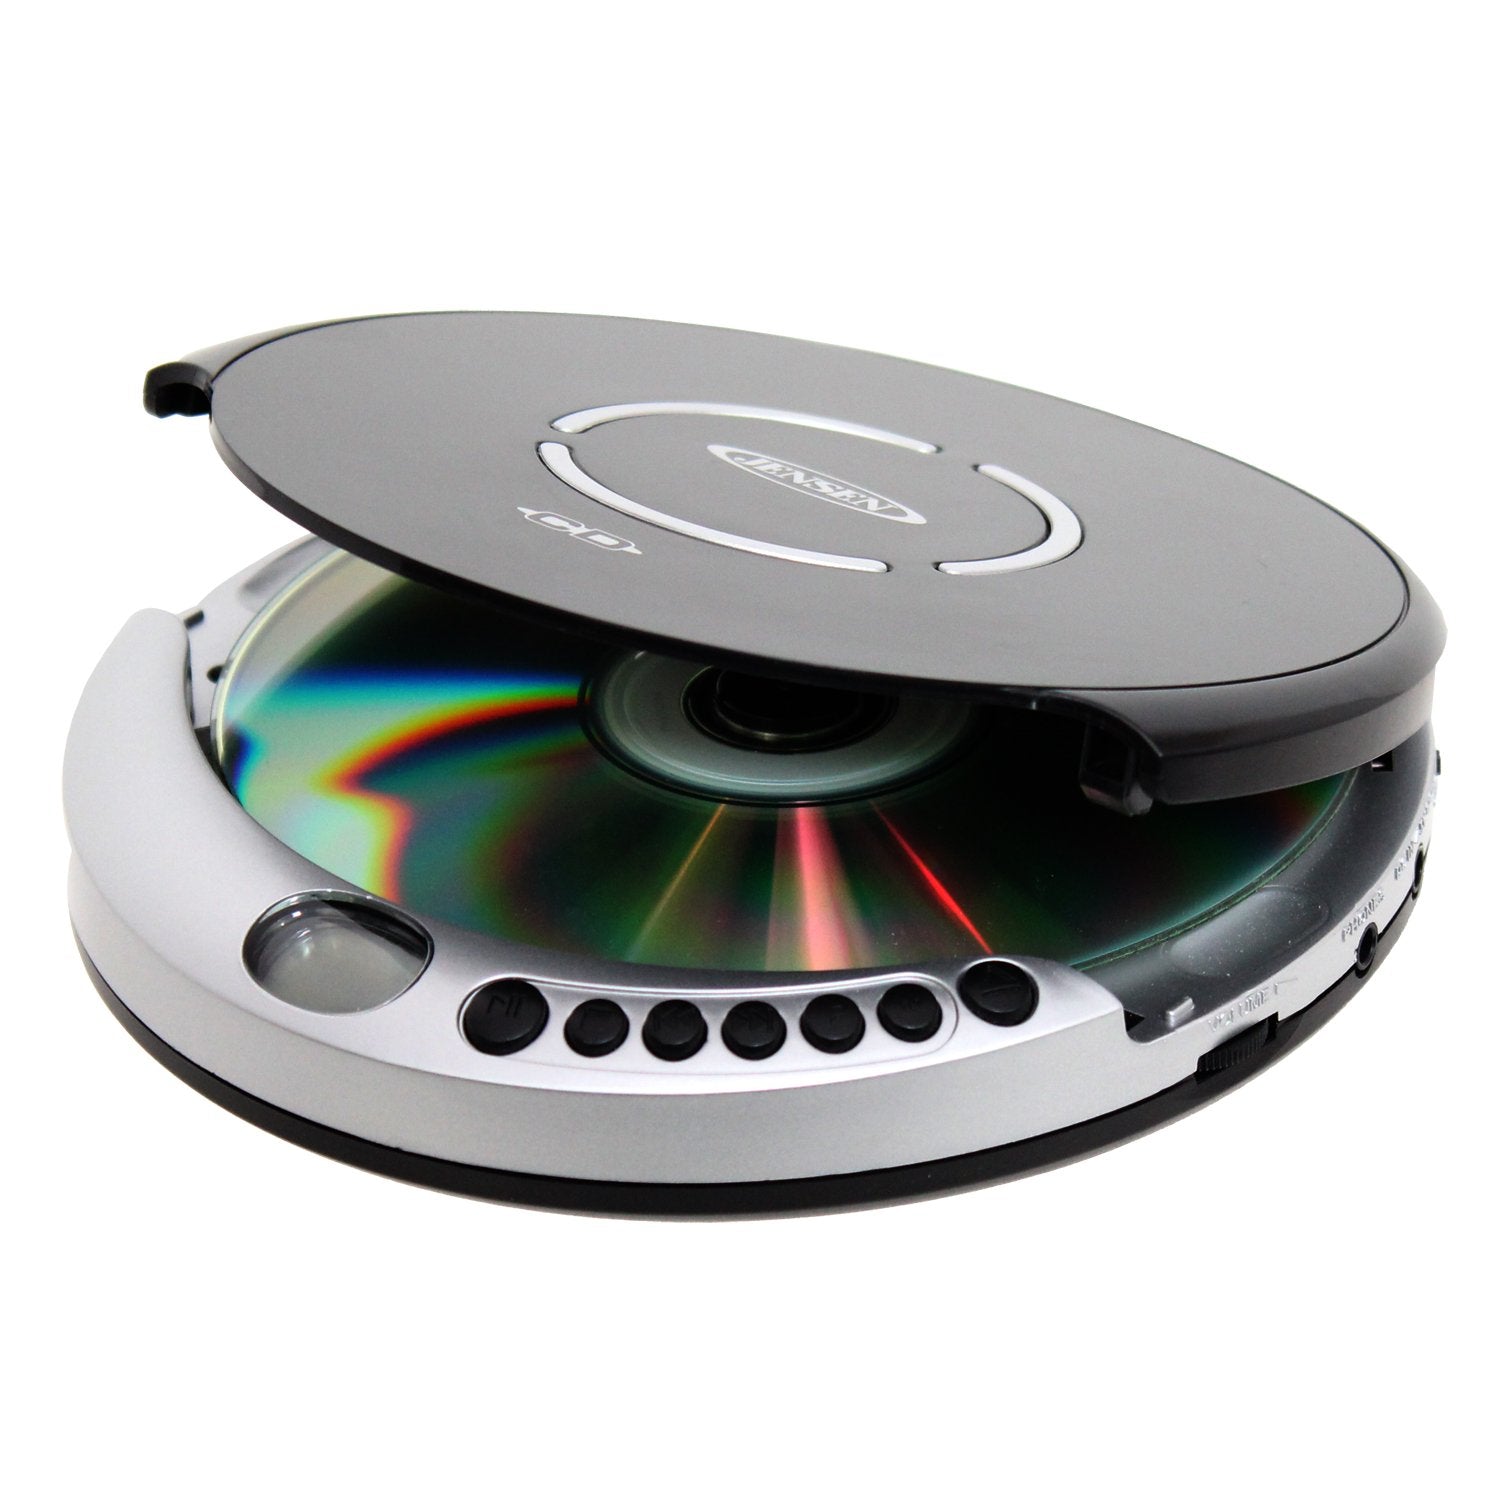 Jensen Portable CD Player with Bass Boost, Silver, JENCD60R